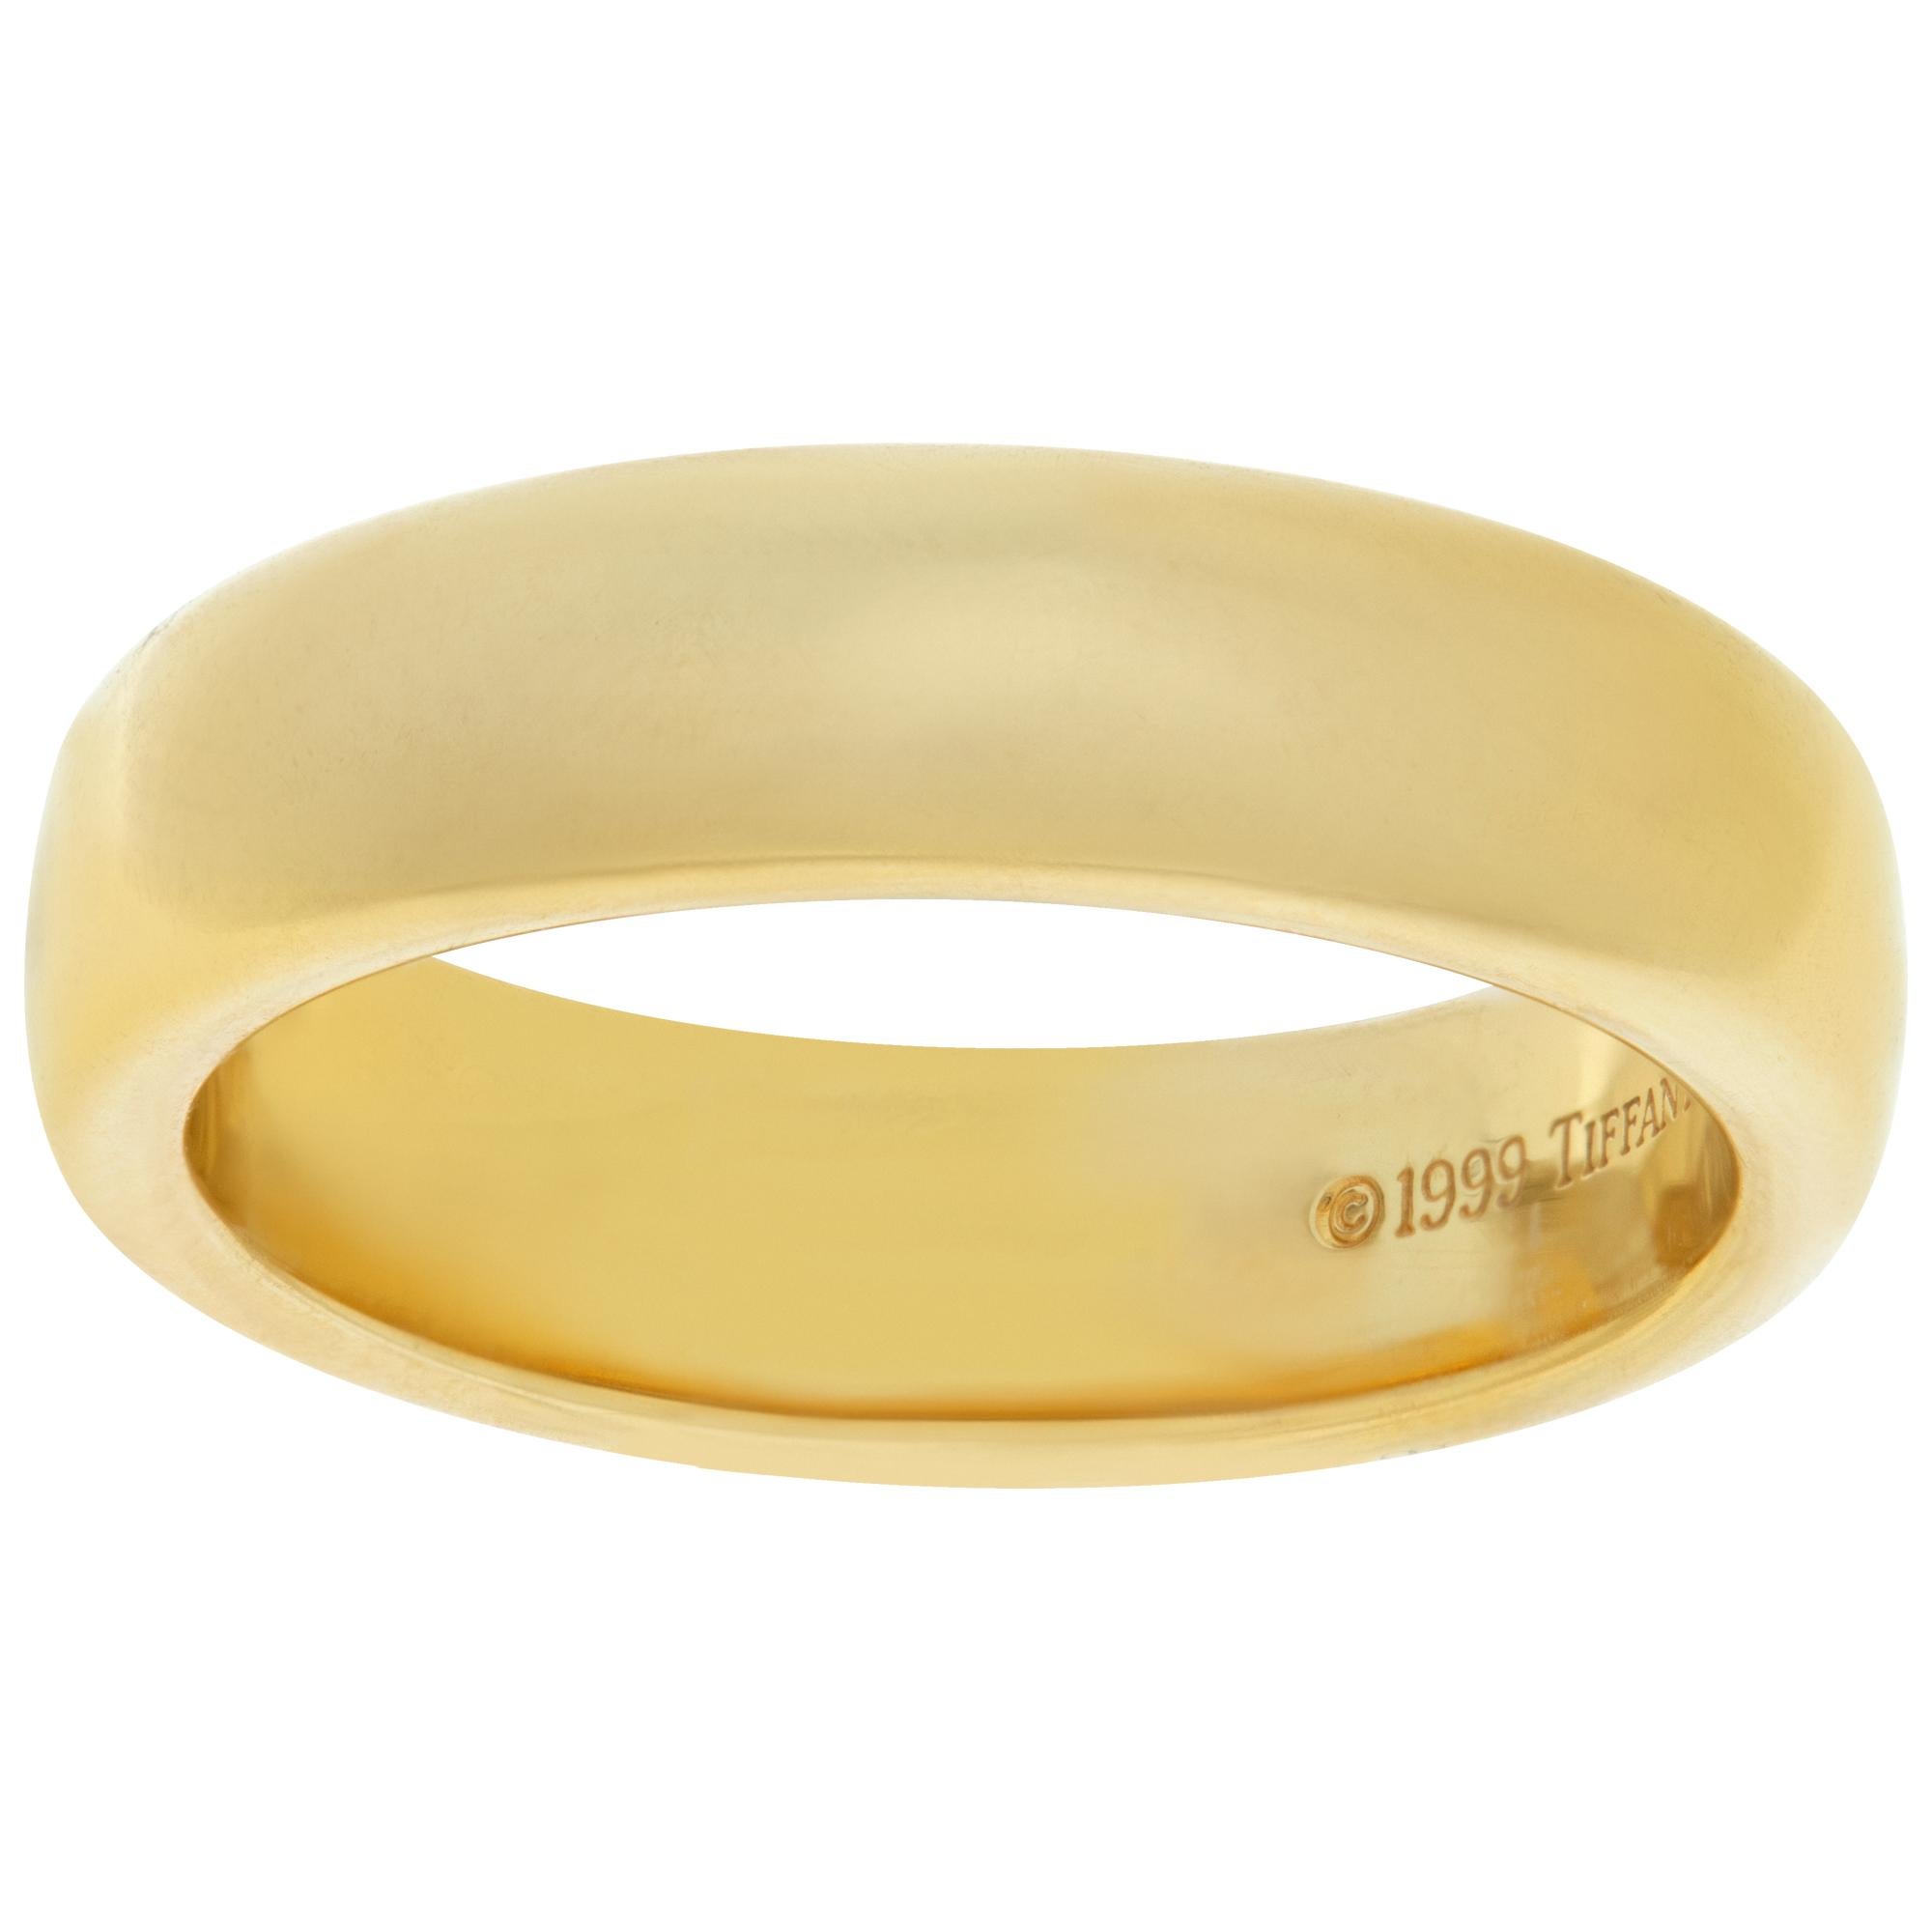 Tiffany & Co. Classic 18k Gelbgold Ehering in im Angebot